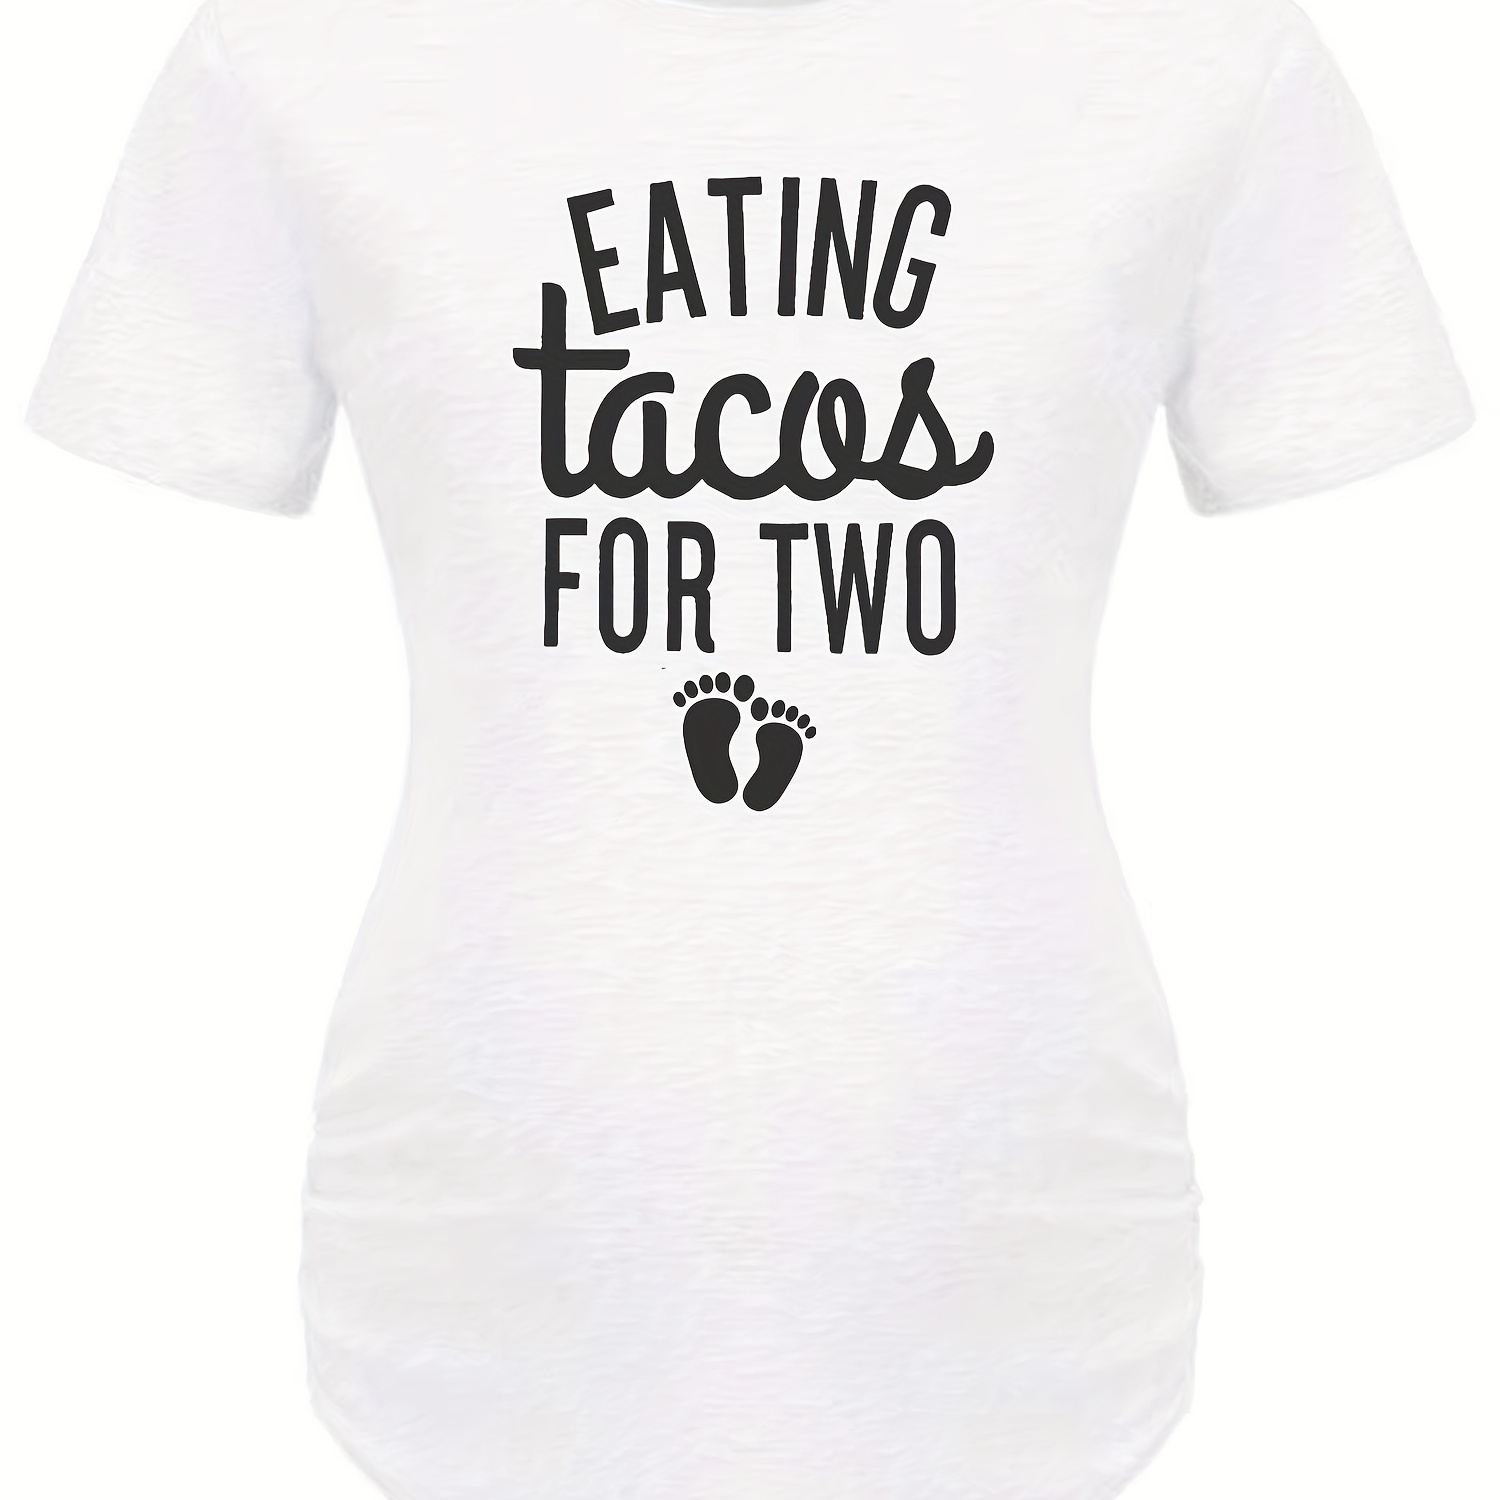 

eating Tacos For Two" Maternity Cute Graphic Letter Print T-shirt - Pregnancy Announcement Short Sleeve Tees Tops